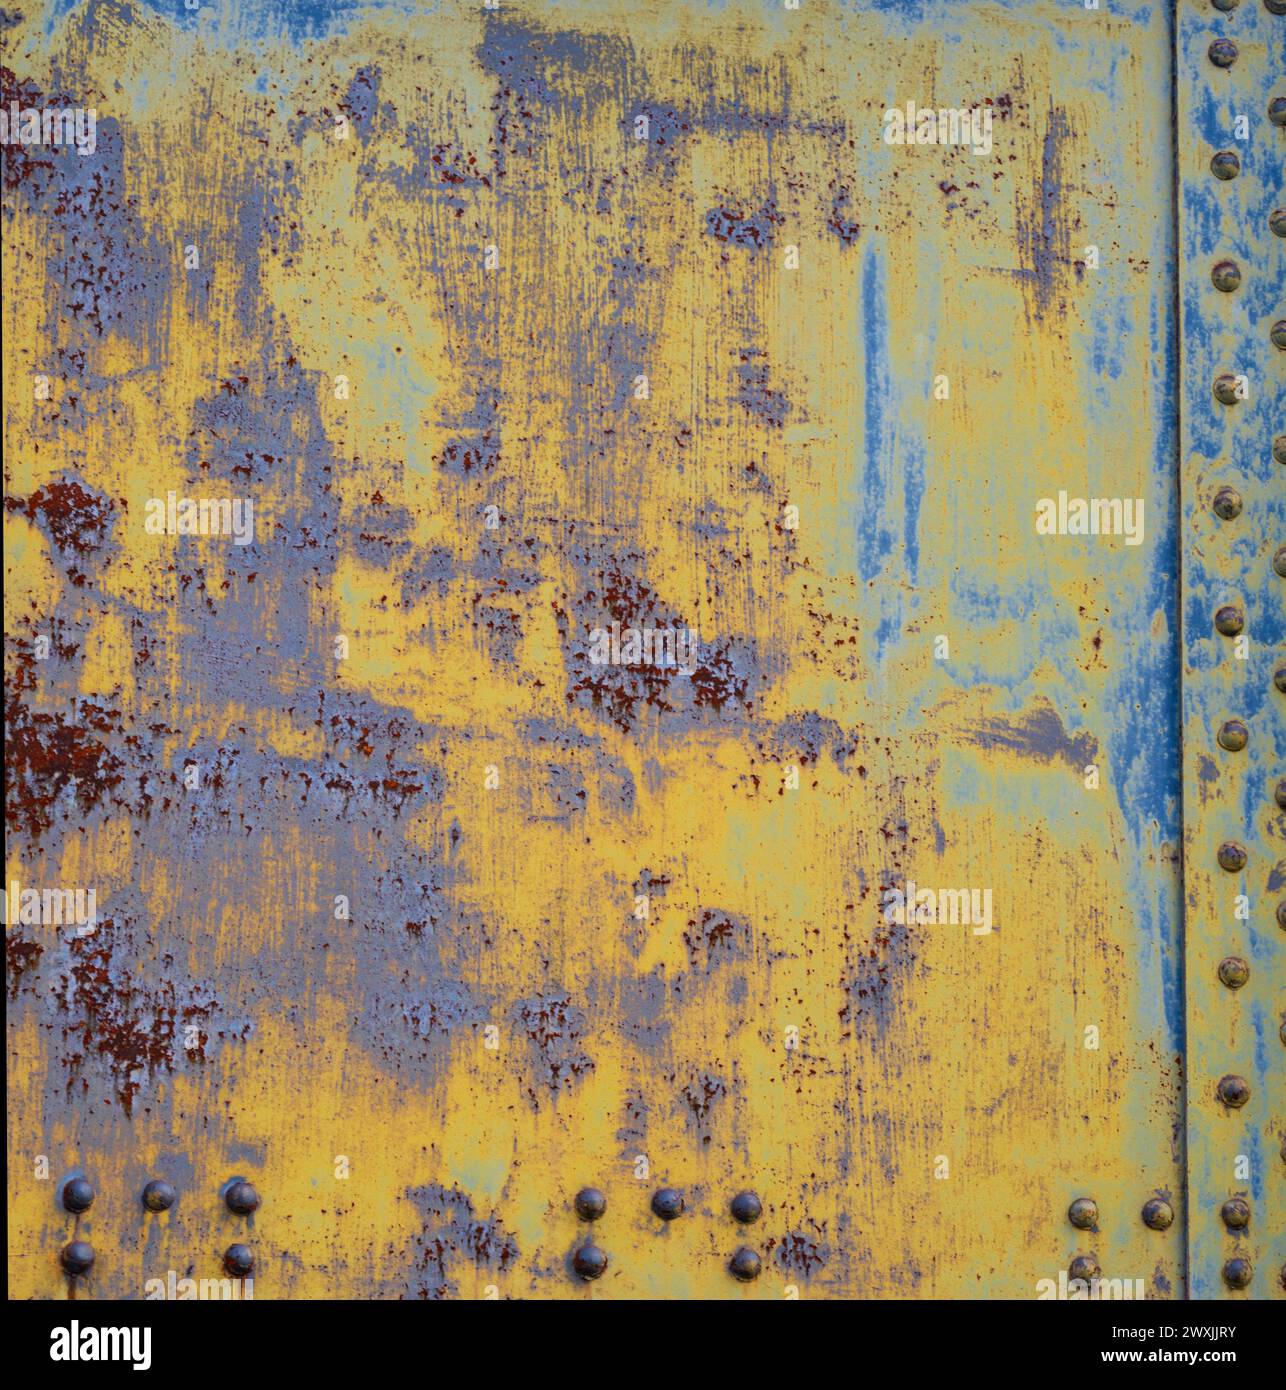 Metal texture with rivets as steam punk. Worn steel texture or metal. Dark worn rusty metal texture background. Scratched and spotted rusty metal Stock Photo